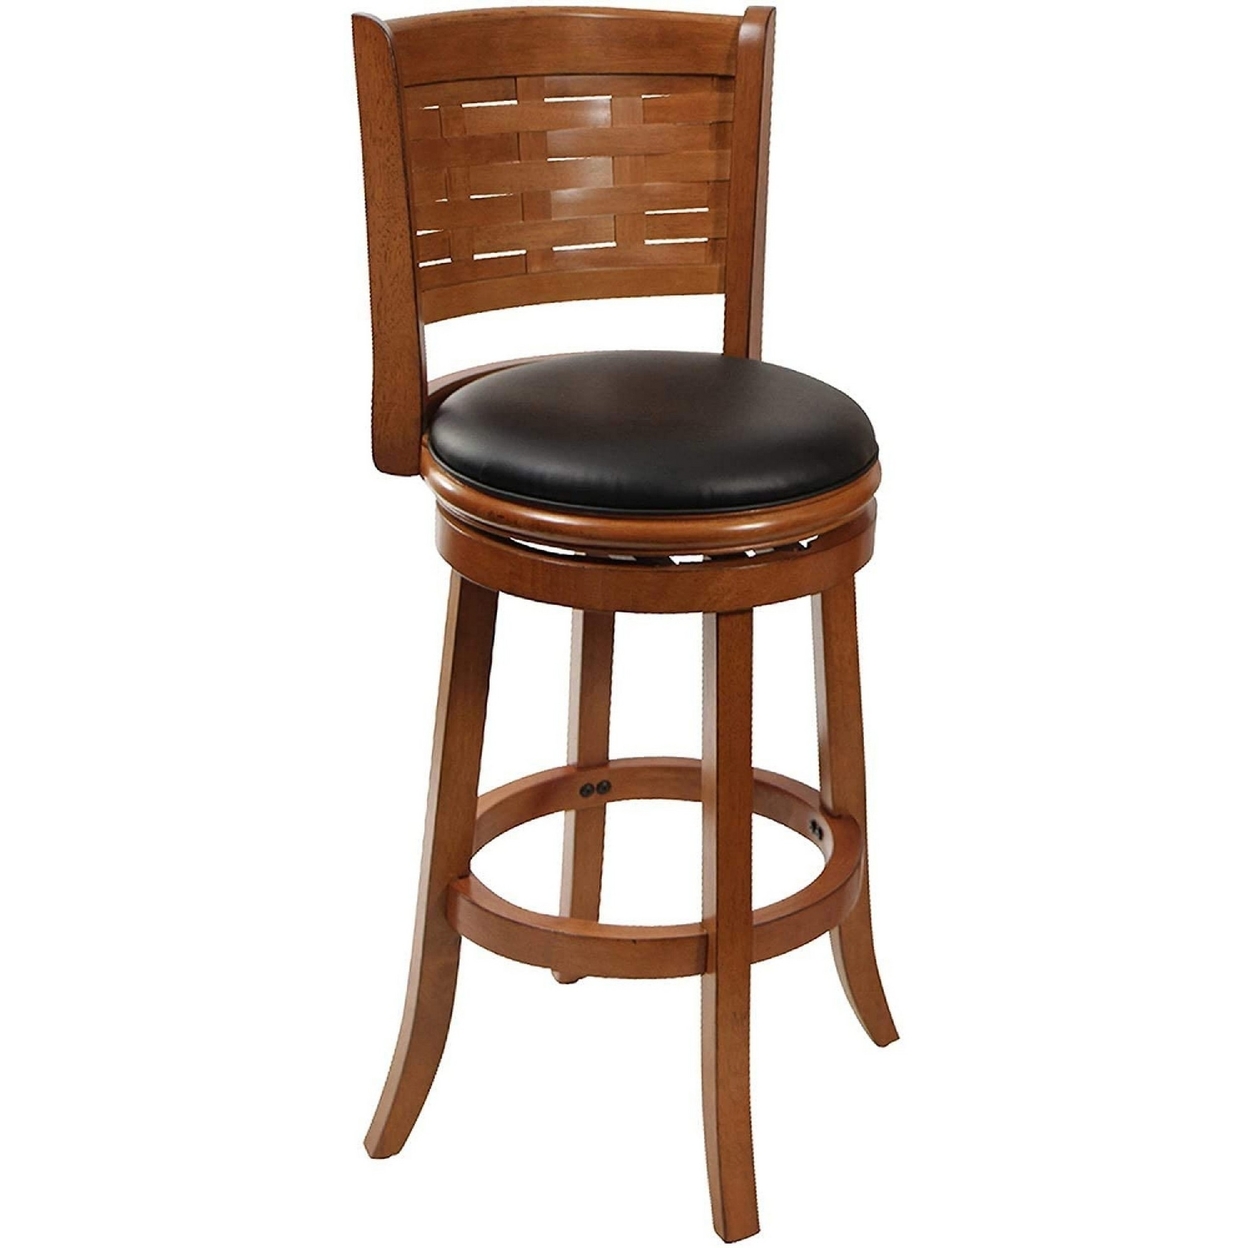 Somi 29 Inch Swivel Bar Stool Chair With Woven Back, Black Faux Leather- Saltoro Sherpi